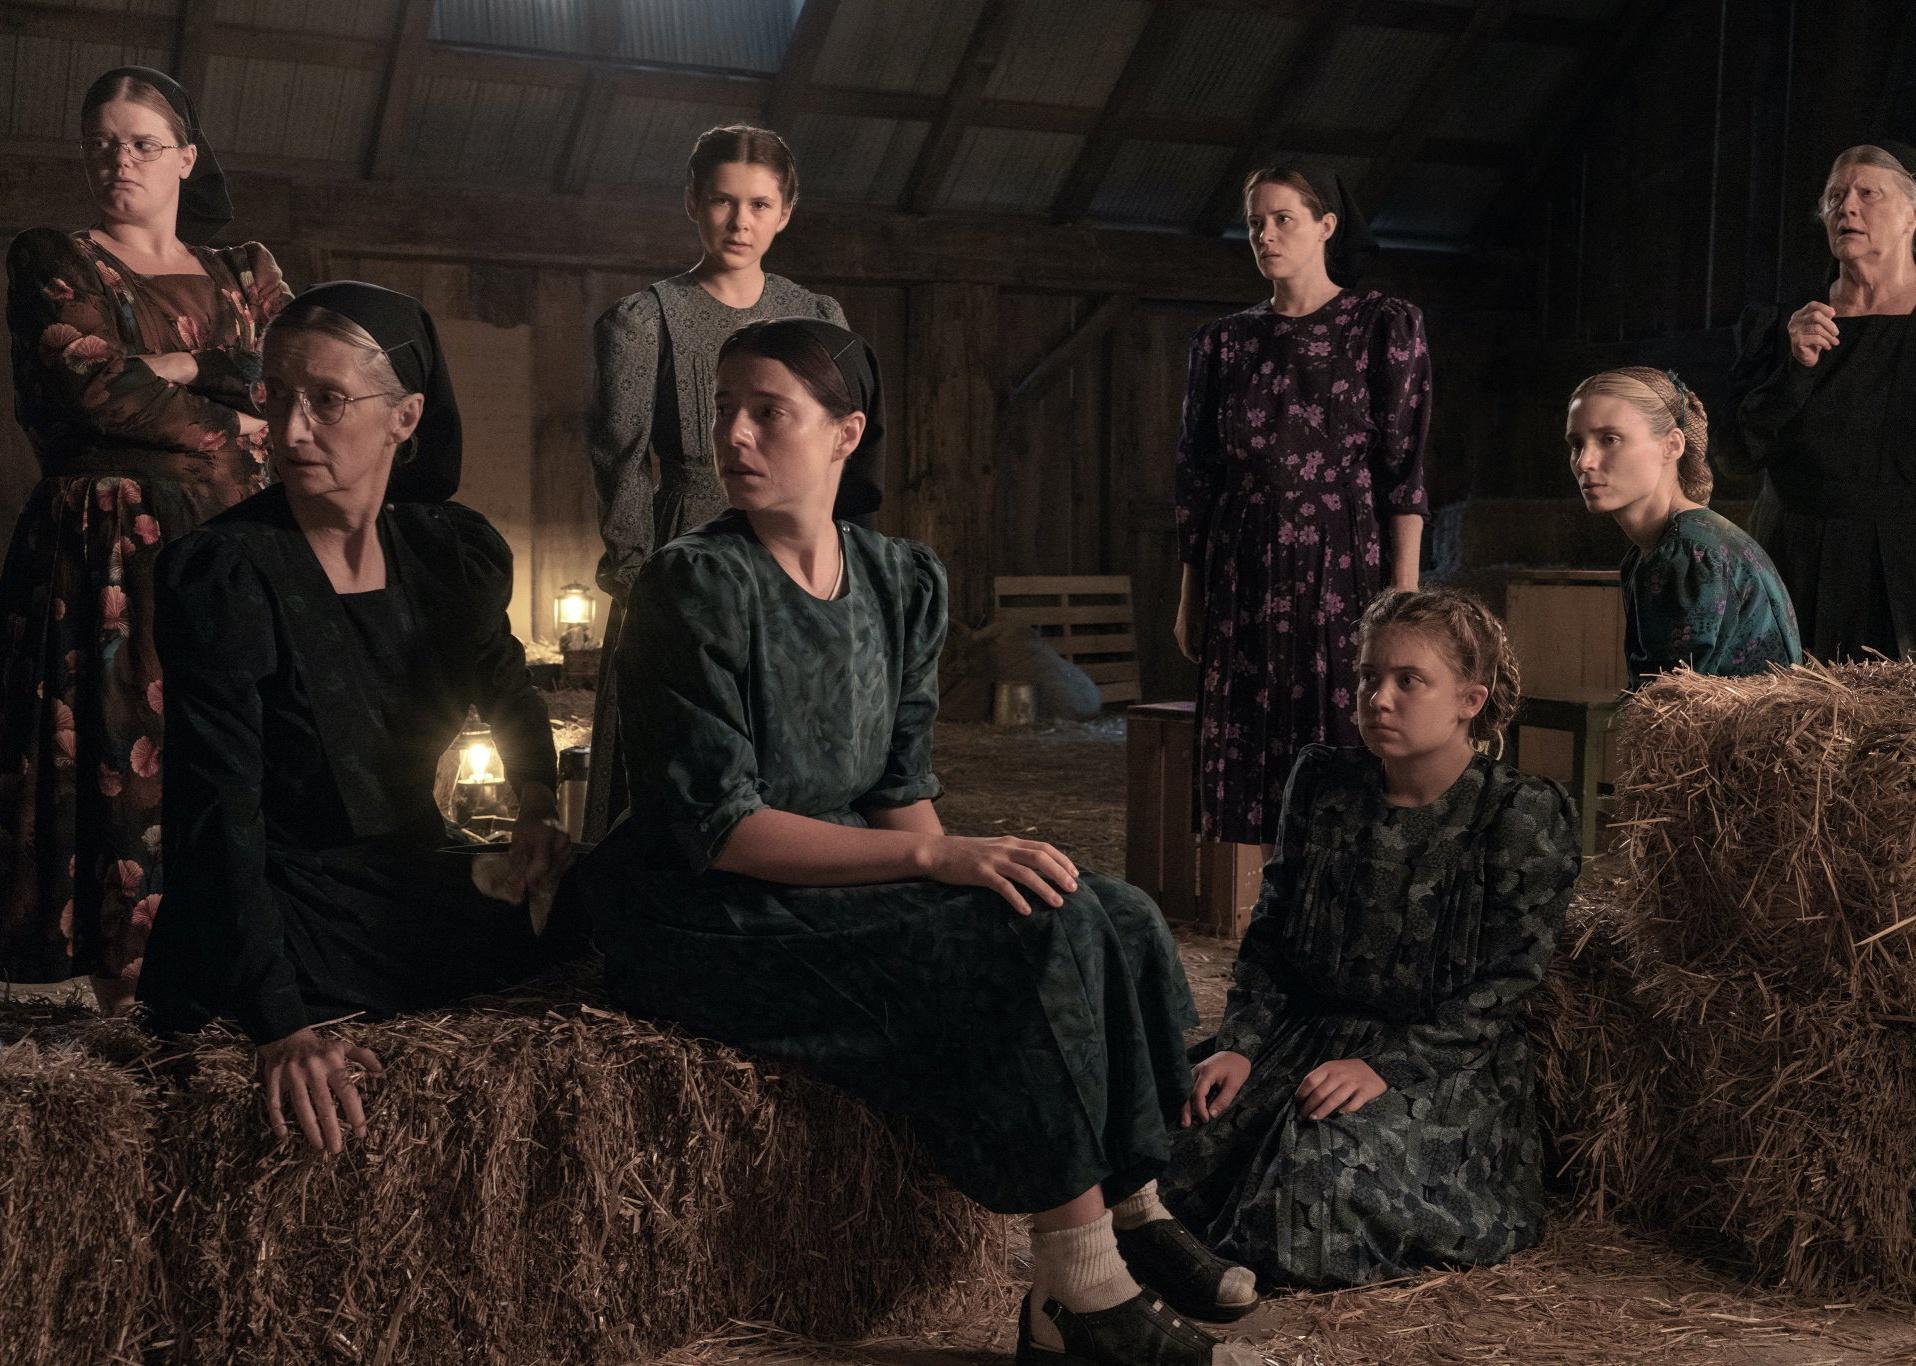 A group of women with worried looks on their faces sit on hay bales in a barn.